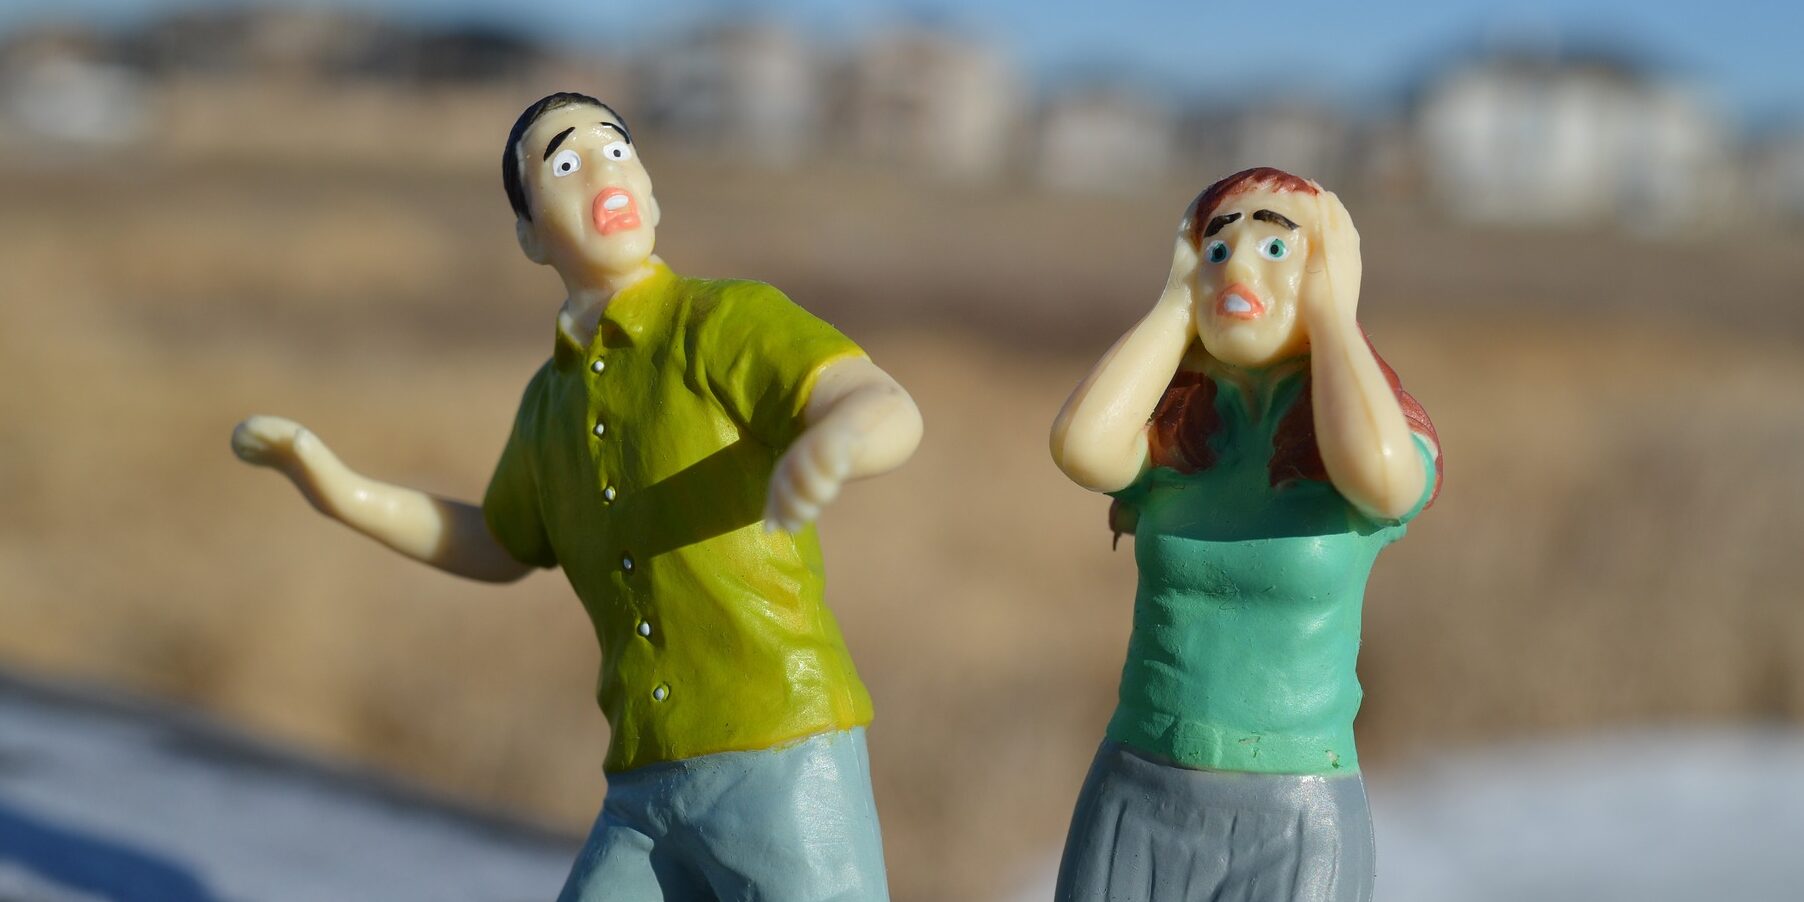 Miniature figures of a man and woman with fear on their faces